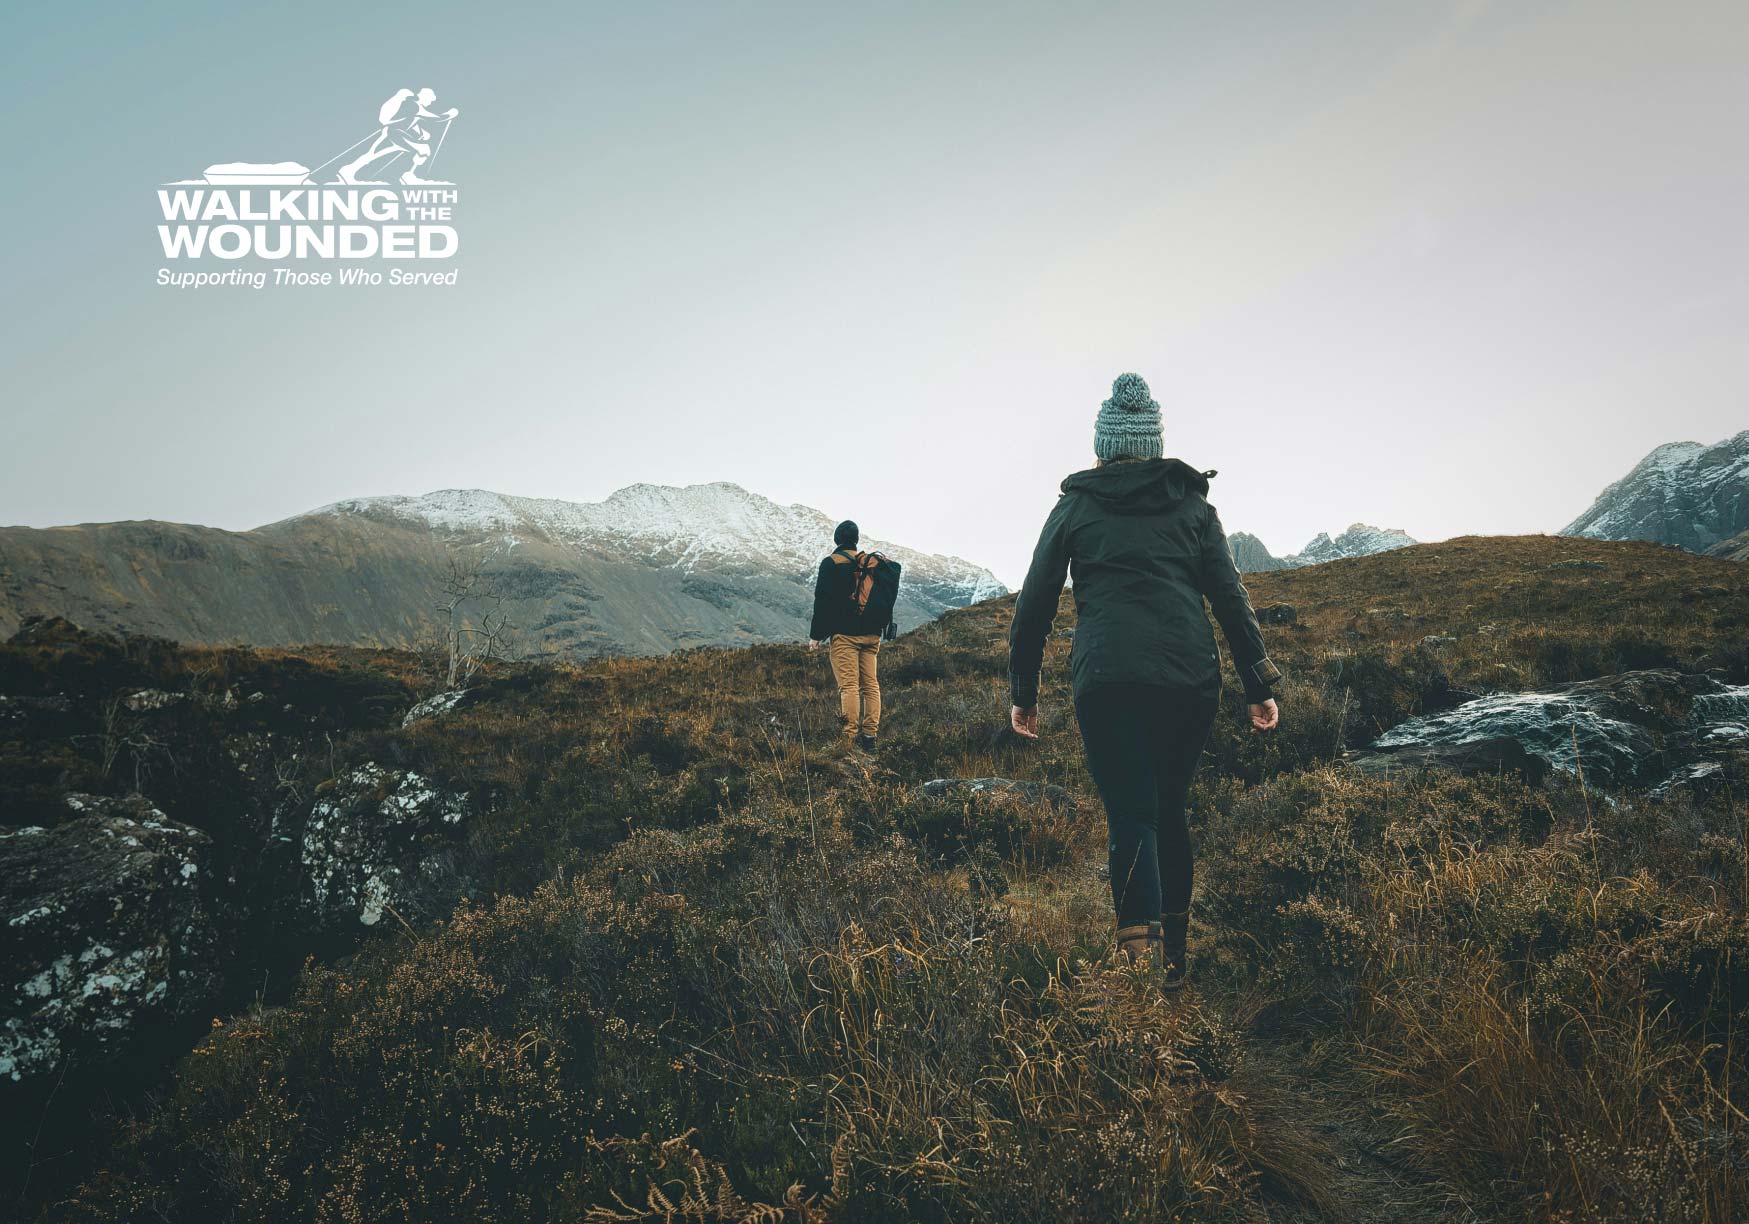 Two people hiking across mountain landscape | Walking With The Wounded